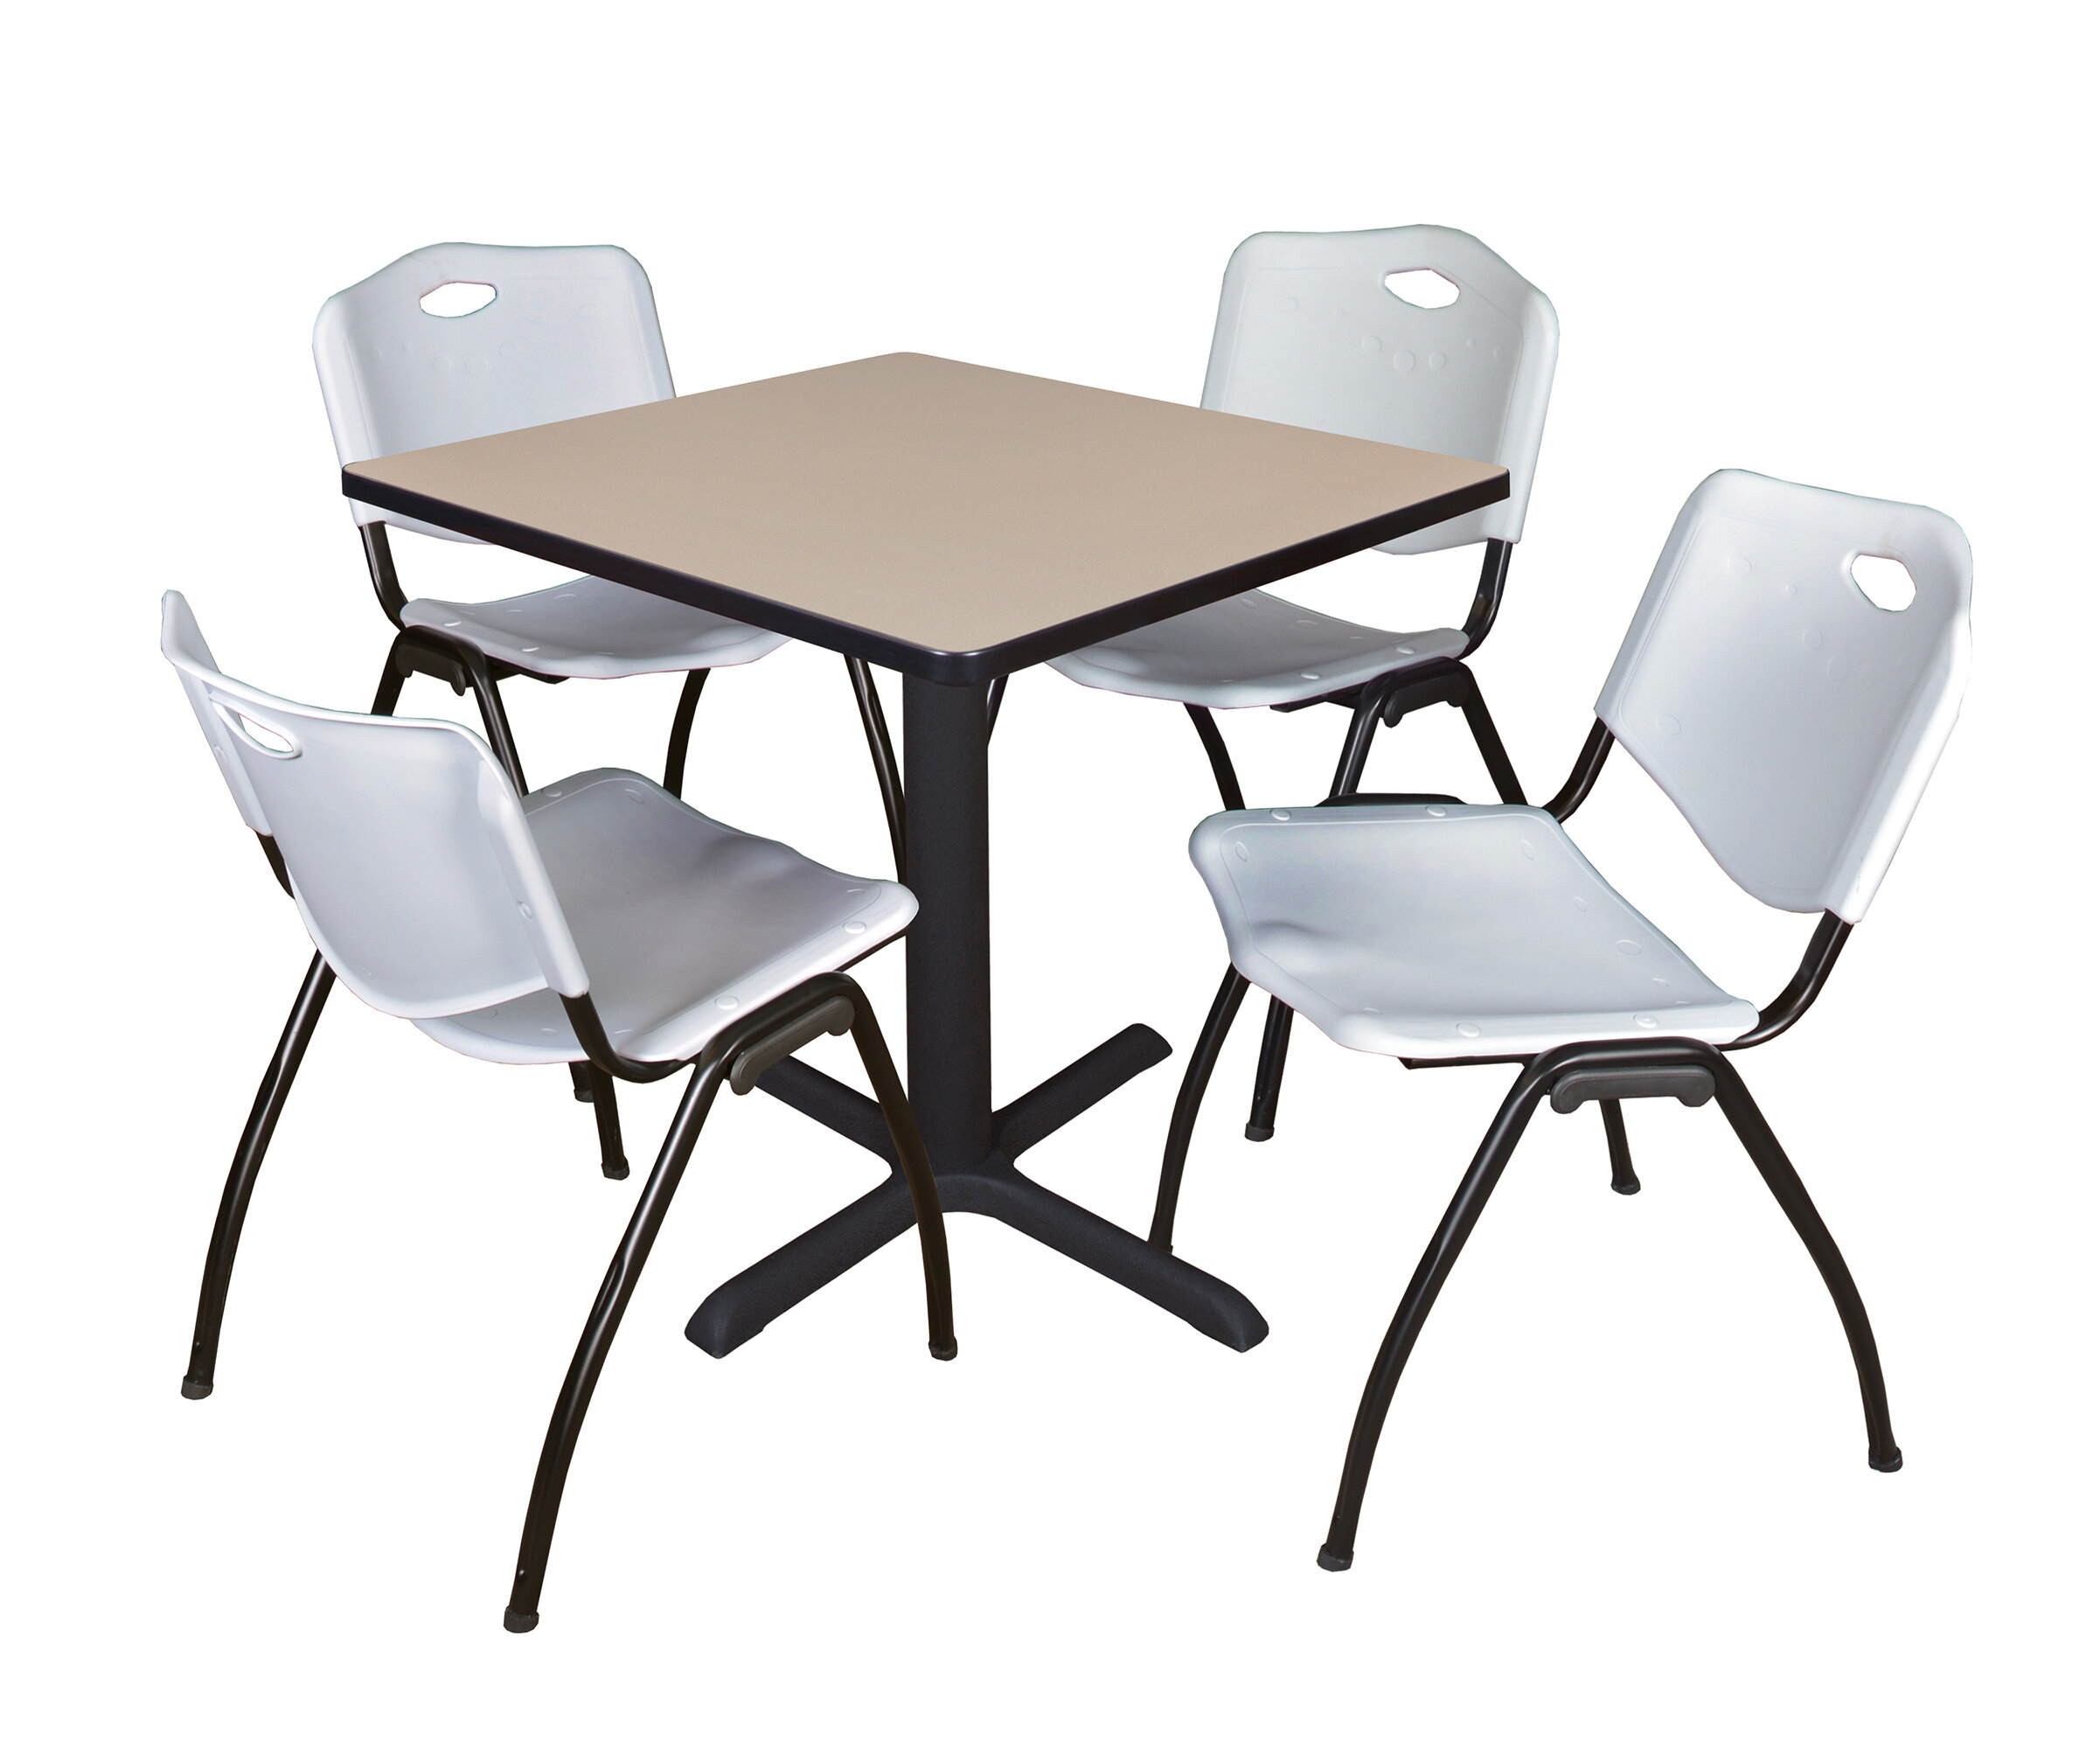 Hendrix 5 Piece 30 Square Breakroom Table And Chair Set